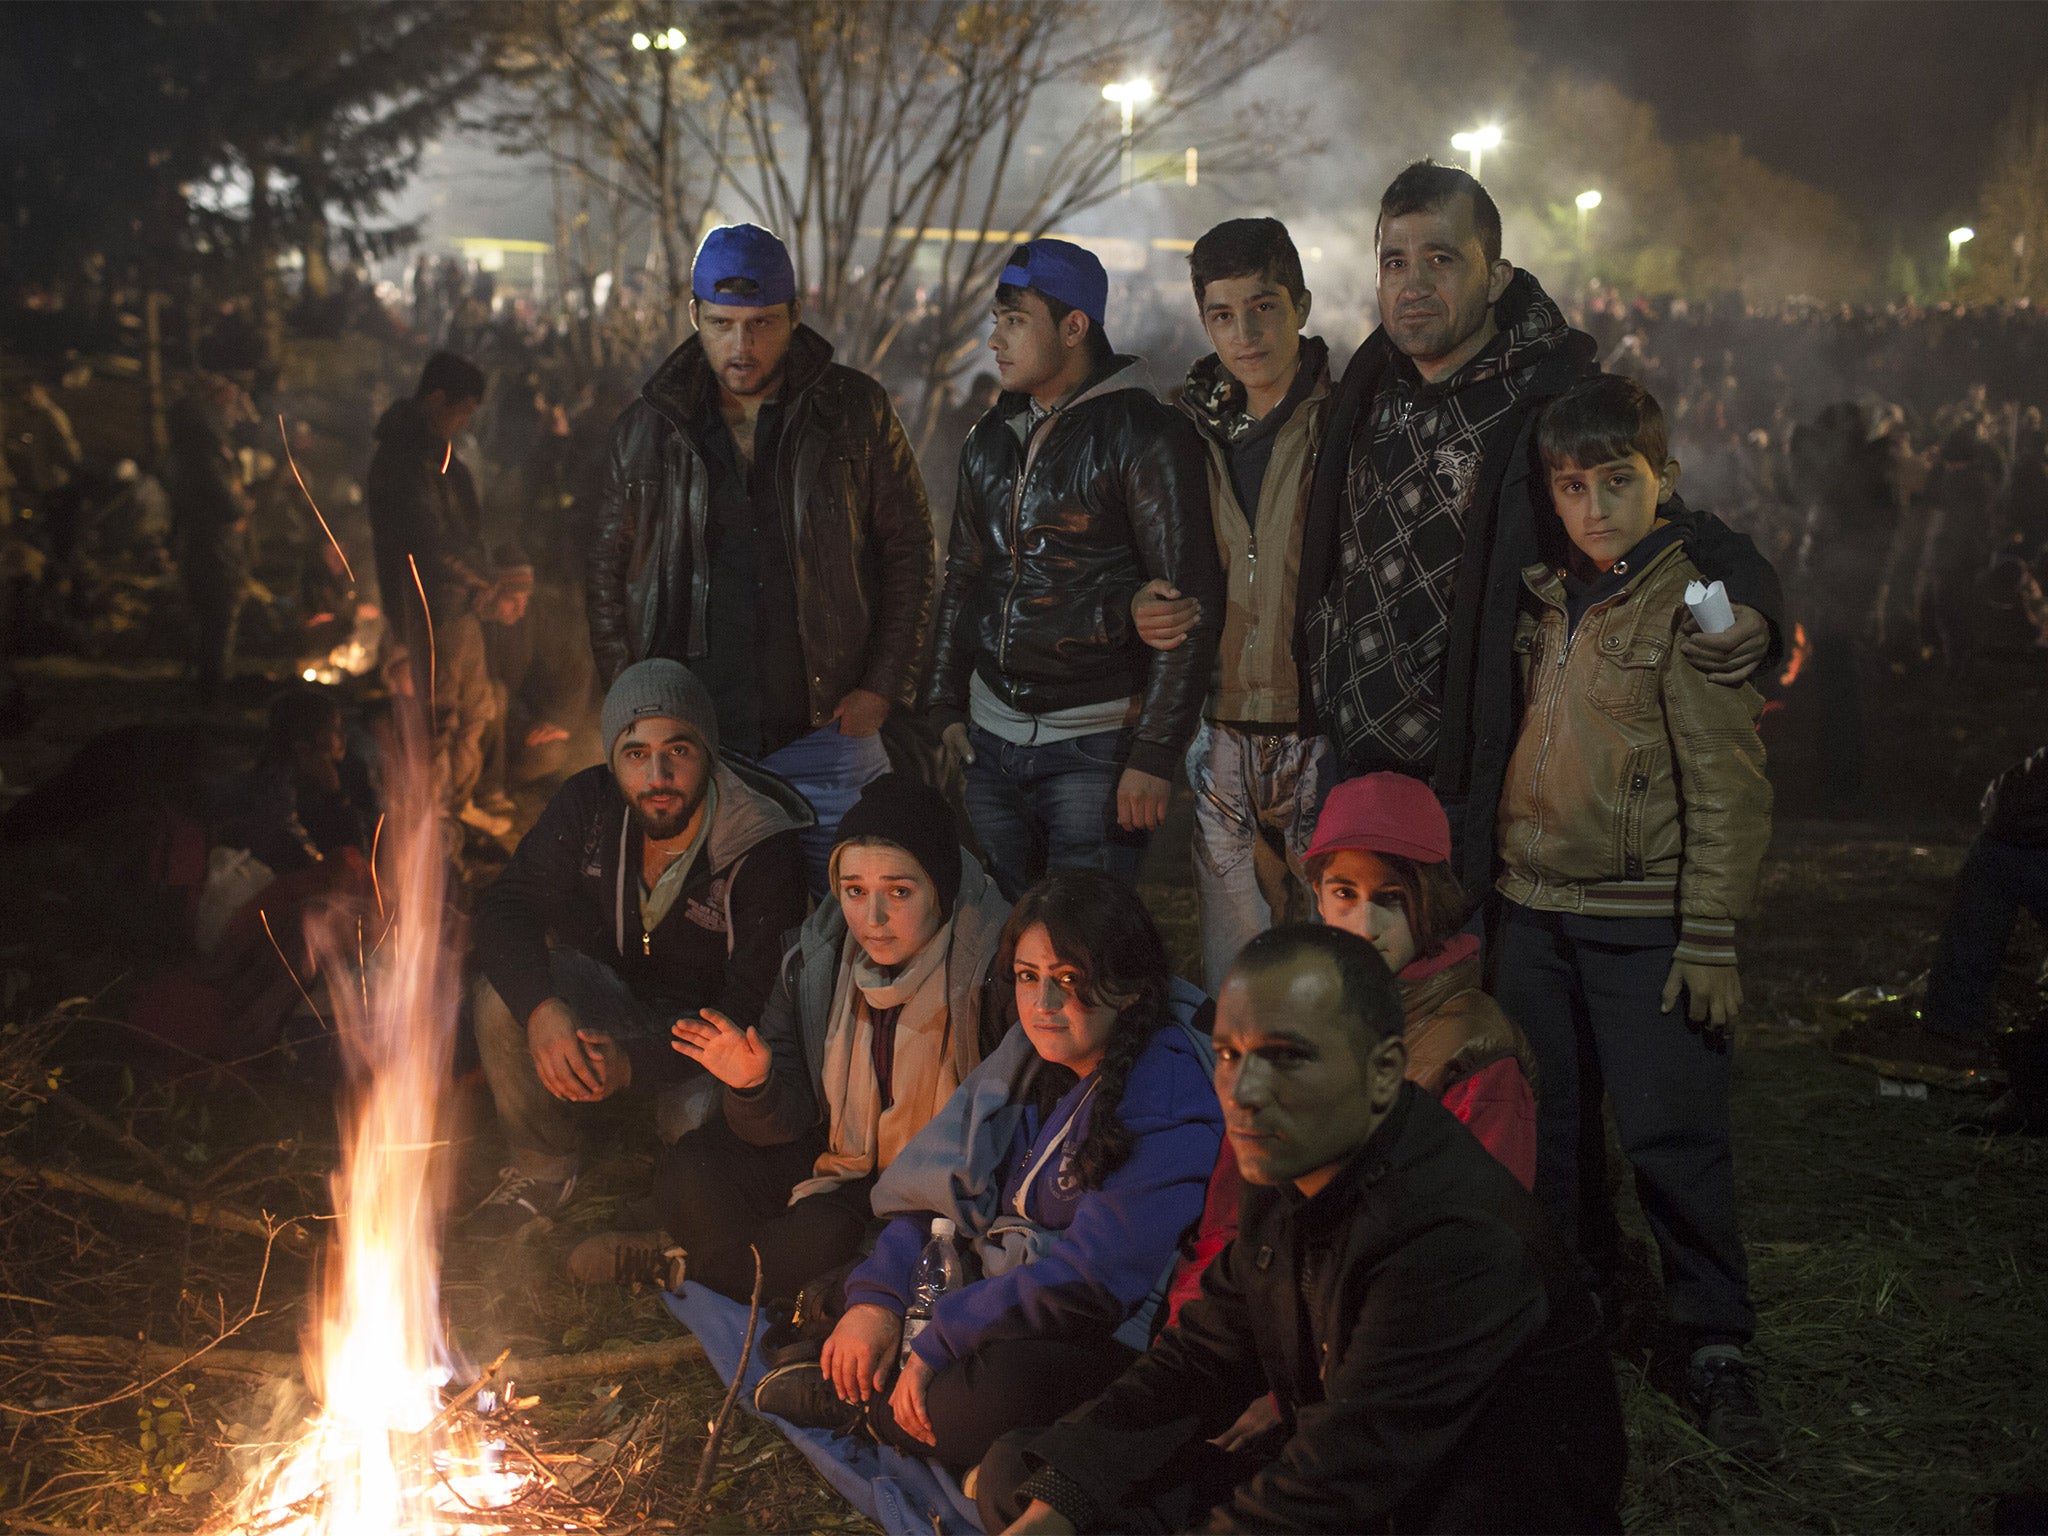 Kawphar Zangana, back right holding his sons, is surrounded by friends and family trying to stay warm while waiting in no-man’s-land on the Slovenian border